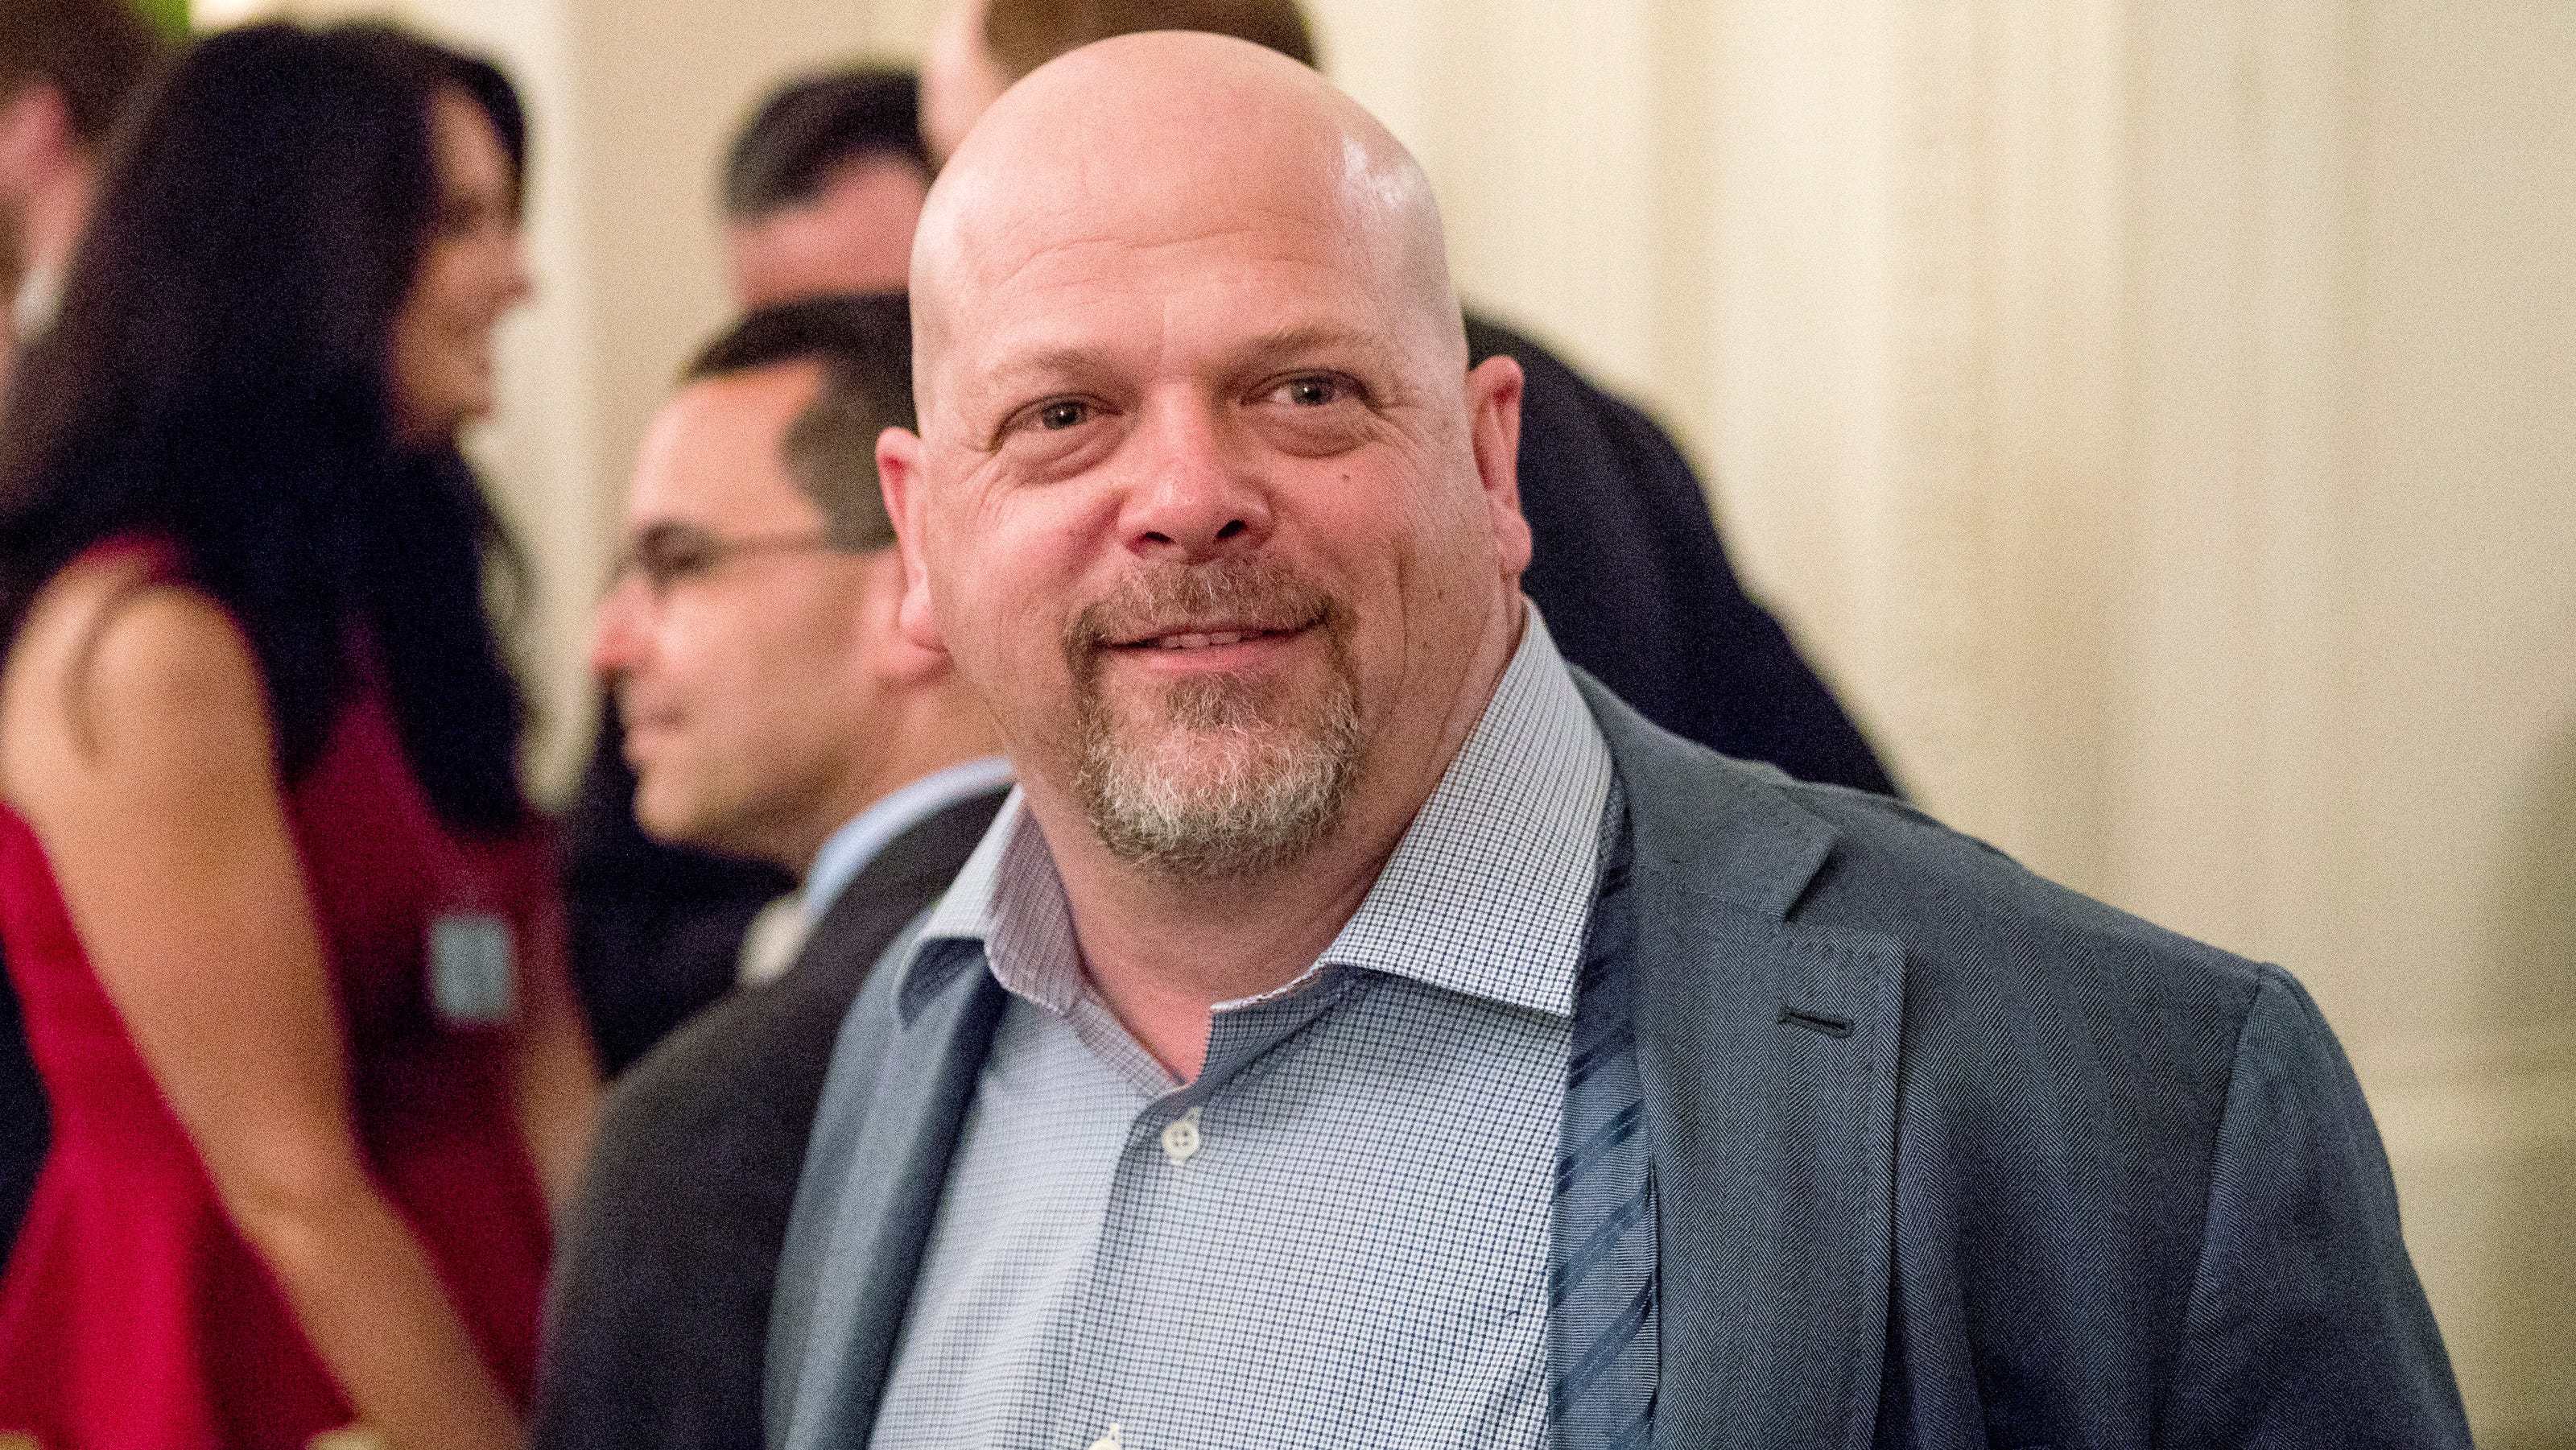 Pawn Stars' Rick Harrison sued by mother over ownership, assets